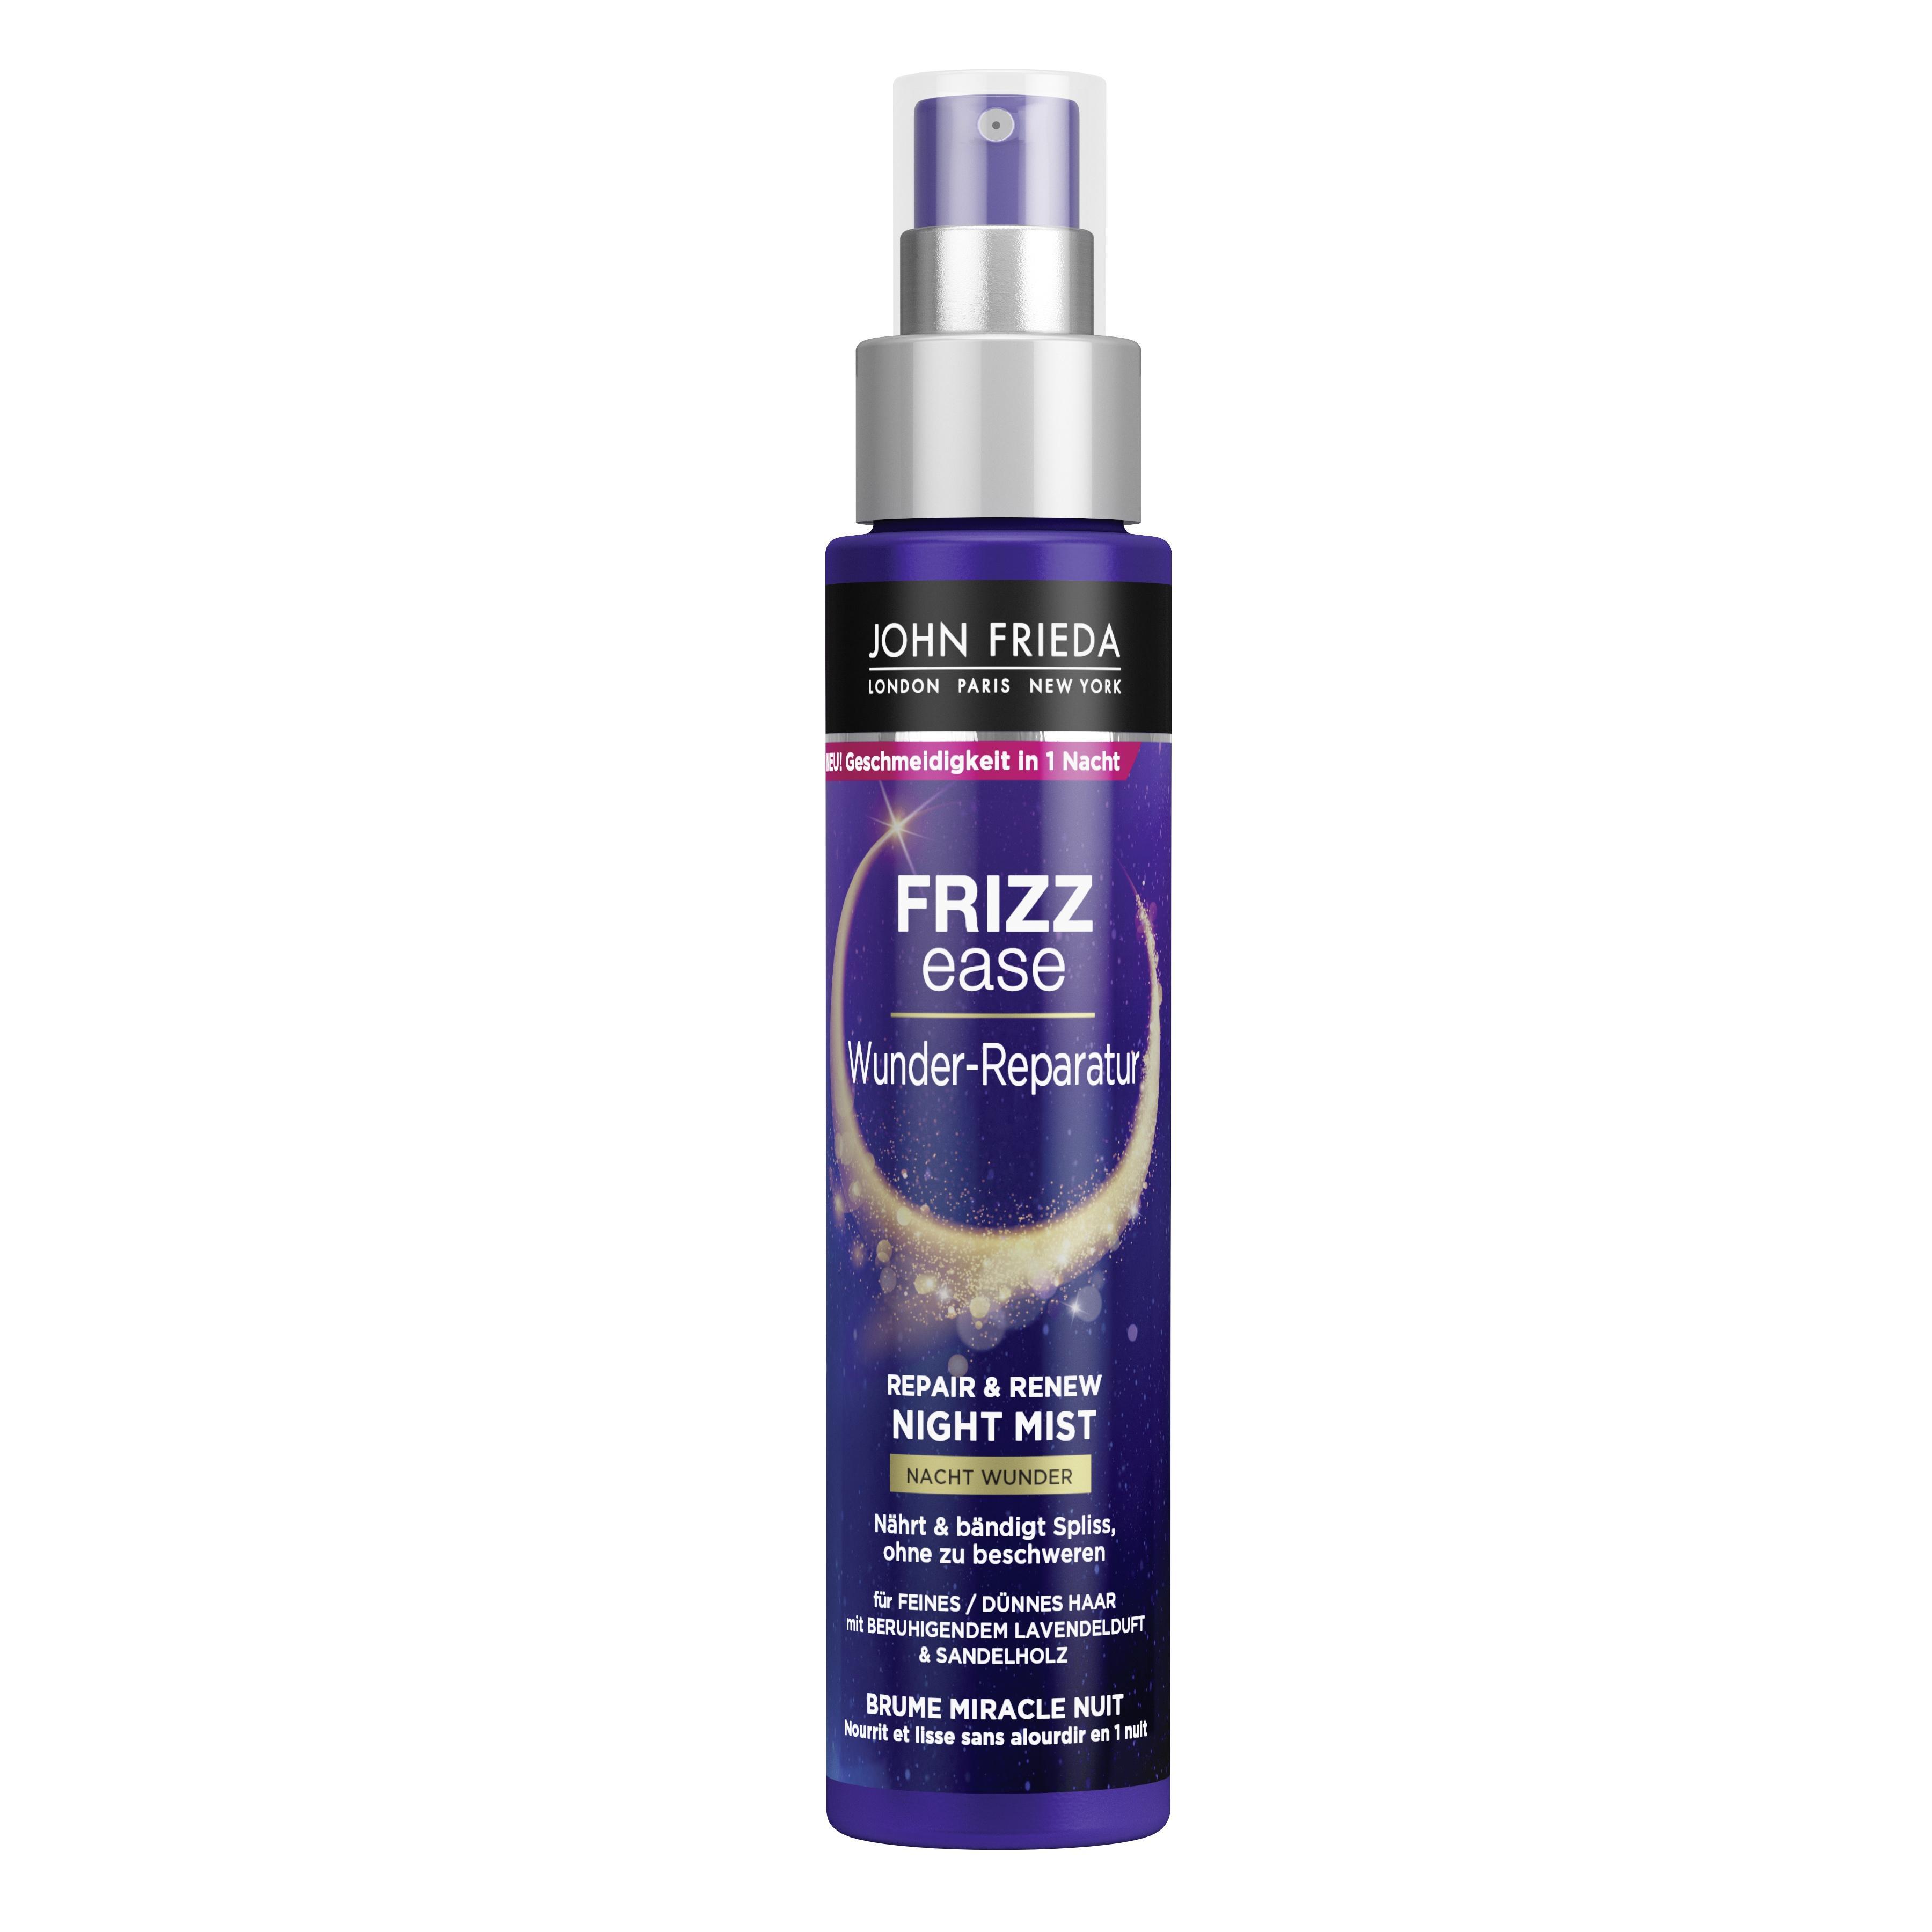 Frizz Ease - Réparation Miracle Brume Miracle Nuit